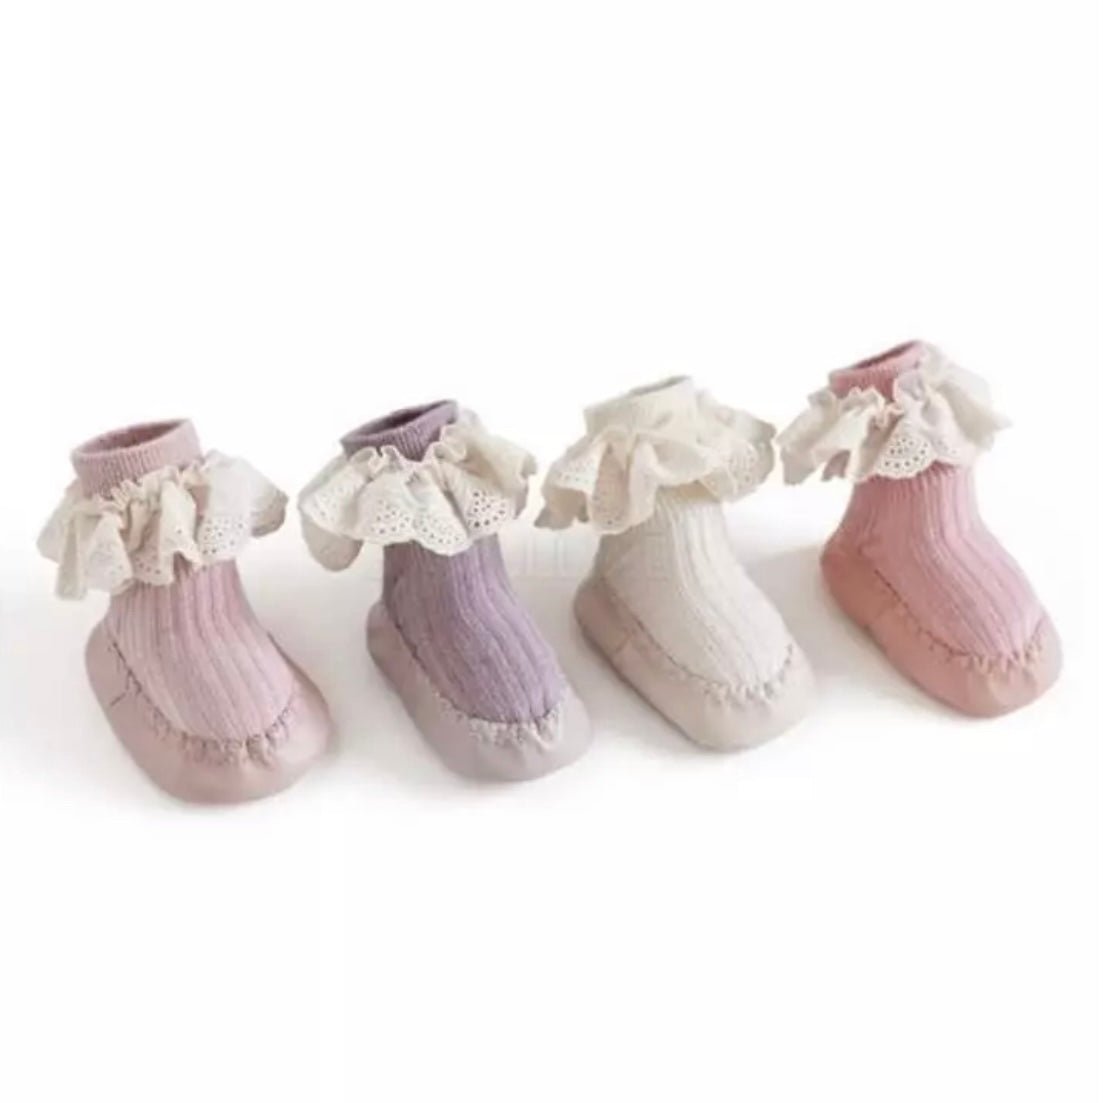 Lace Walk Soft Booties find Stylish Fashion for Little People- at Little Foxx Concept Store